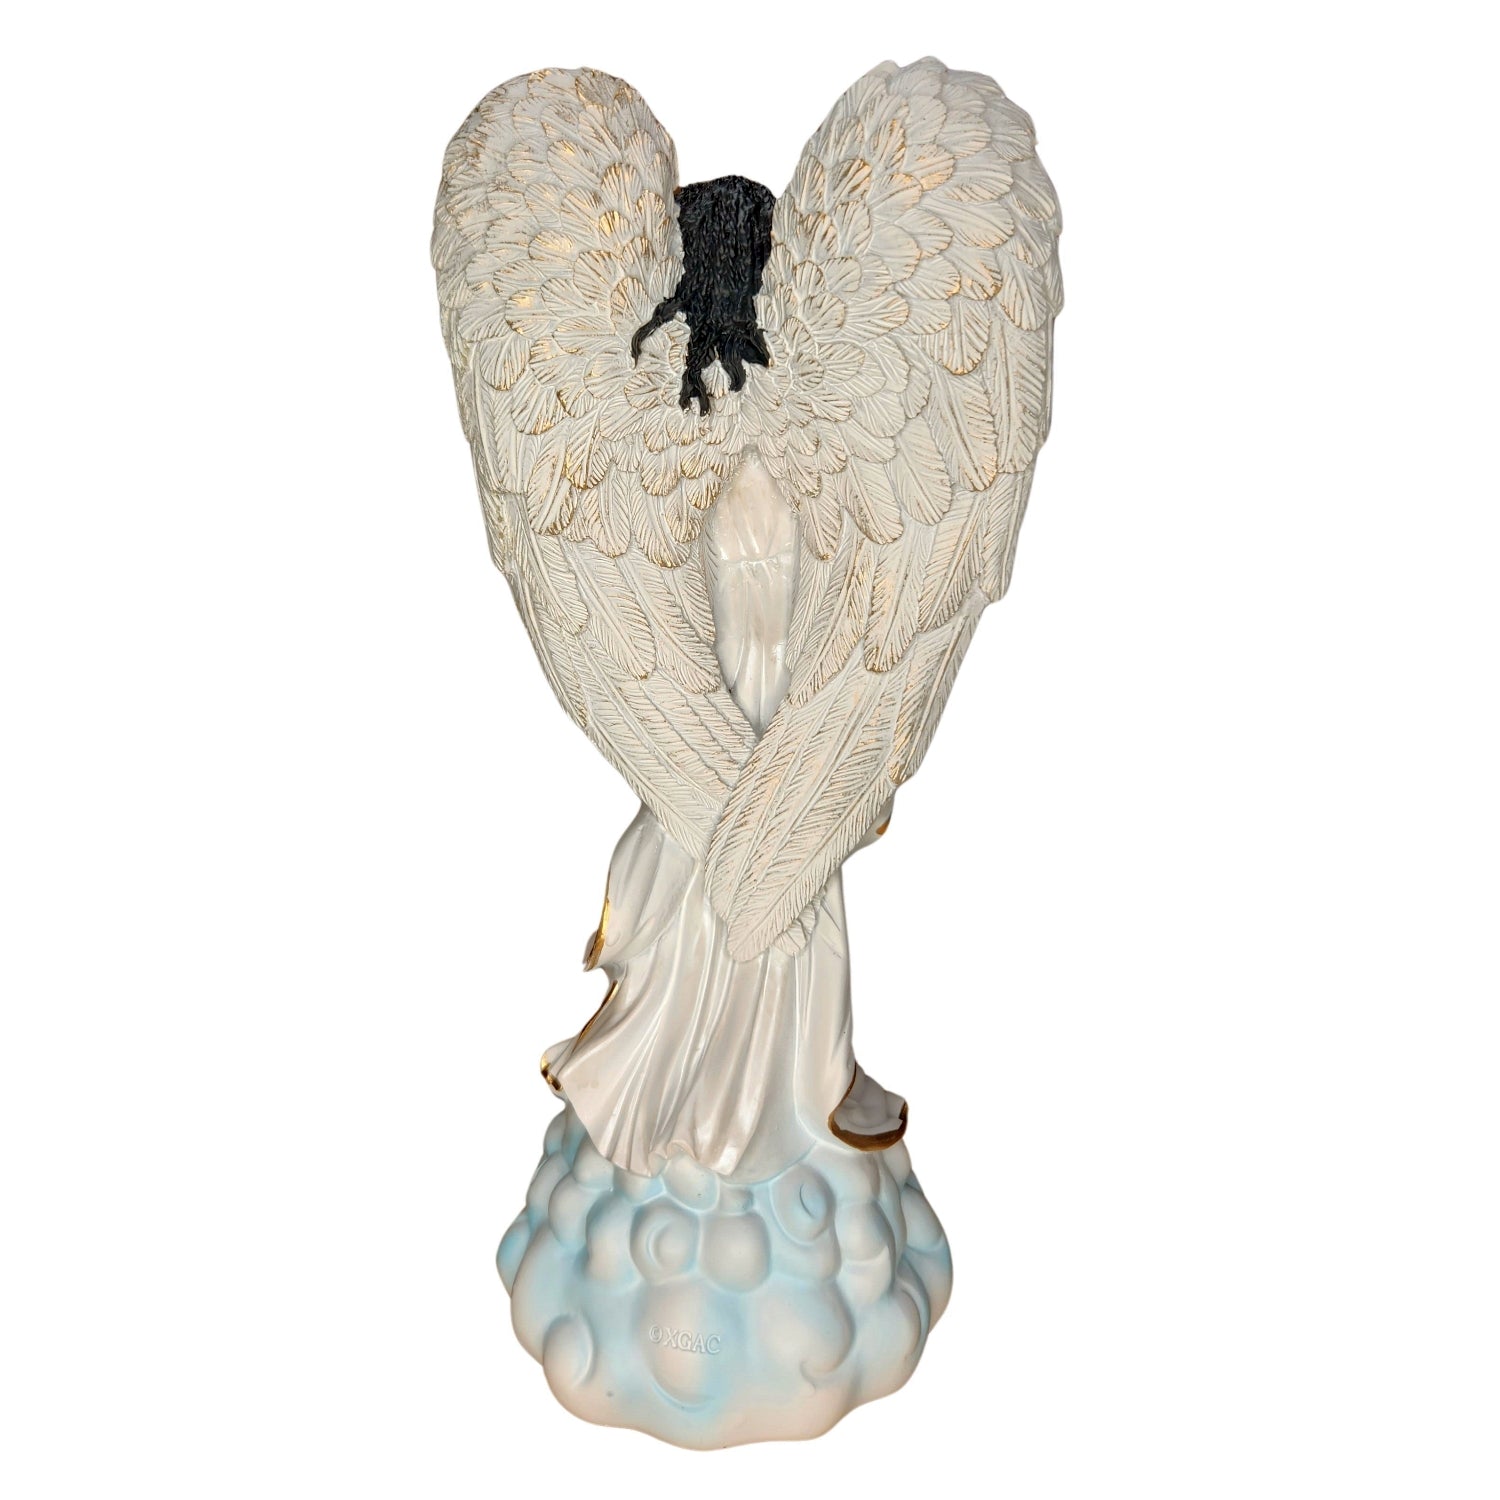 3 of 6: Graceful African American Angel in White with Dove Figurine